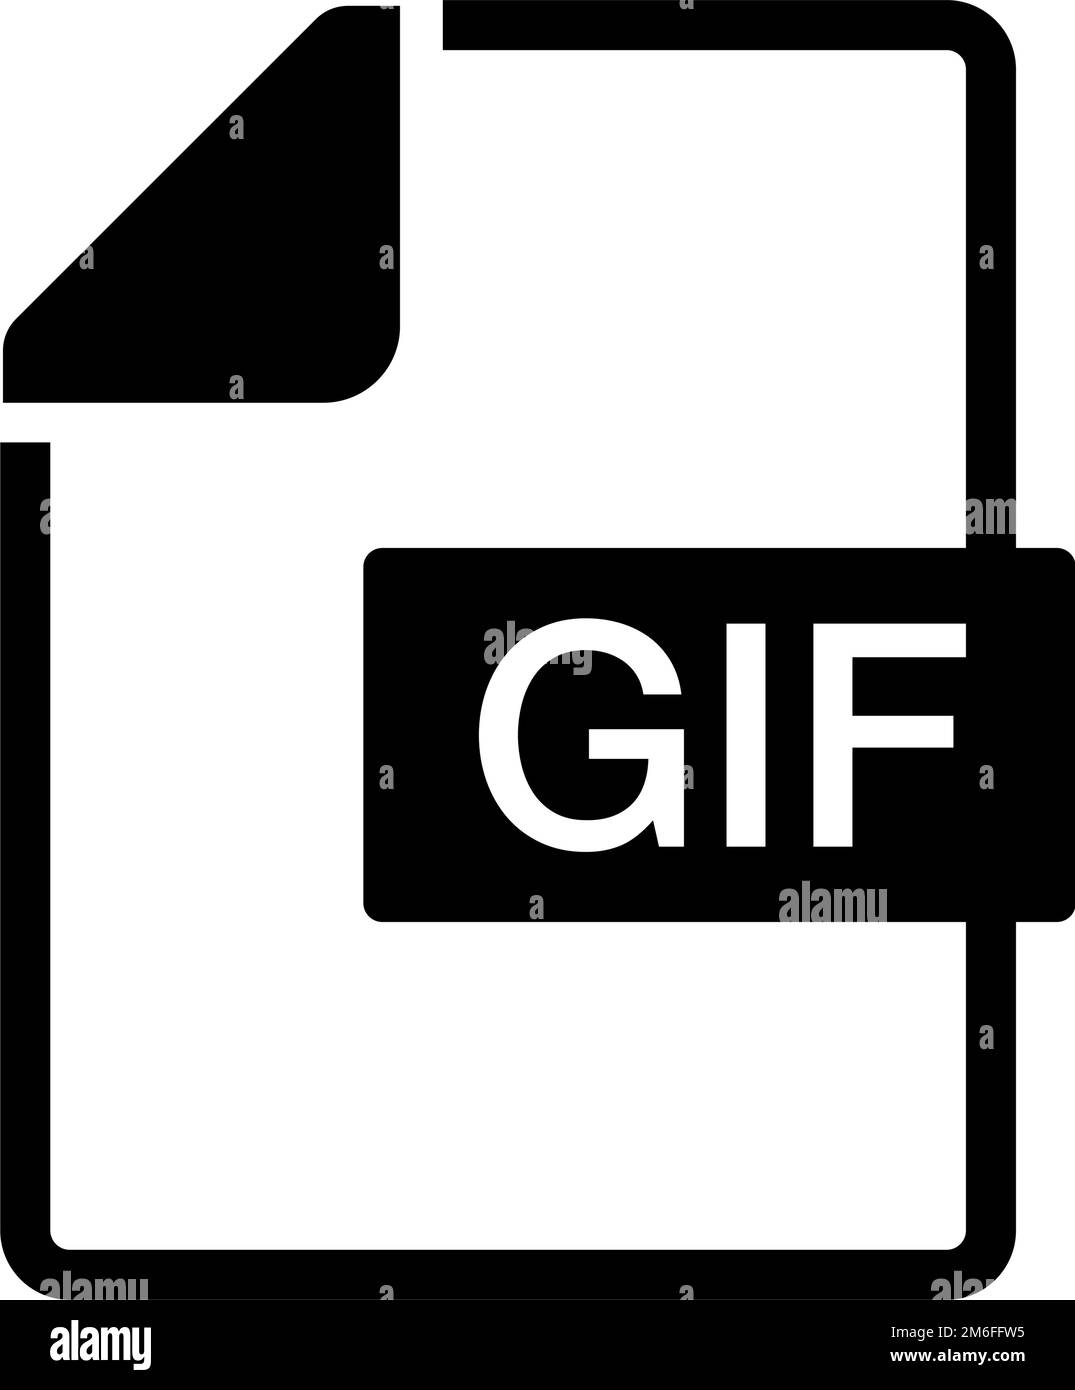 Gif image extension - Free interface icons